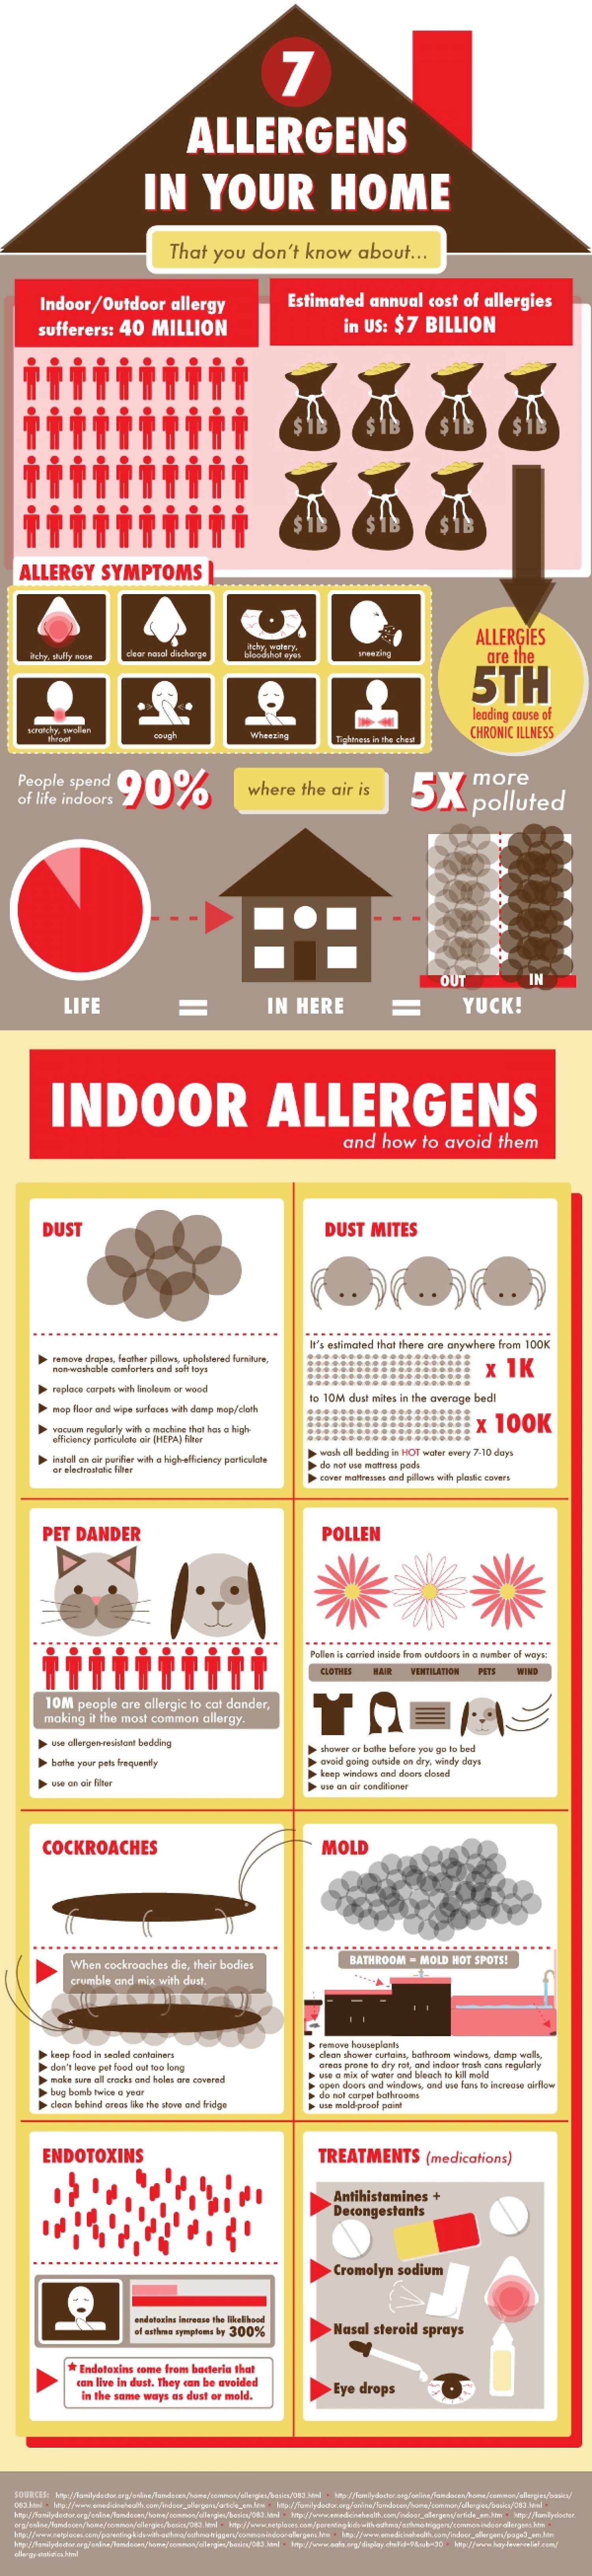 7-allergens-in-your-home-that-you-dont-know-about_50290f91e36fb_w1500